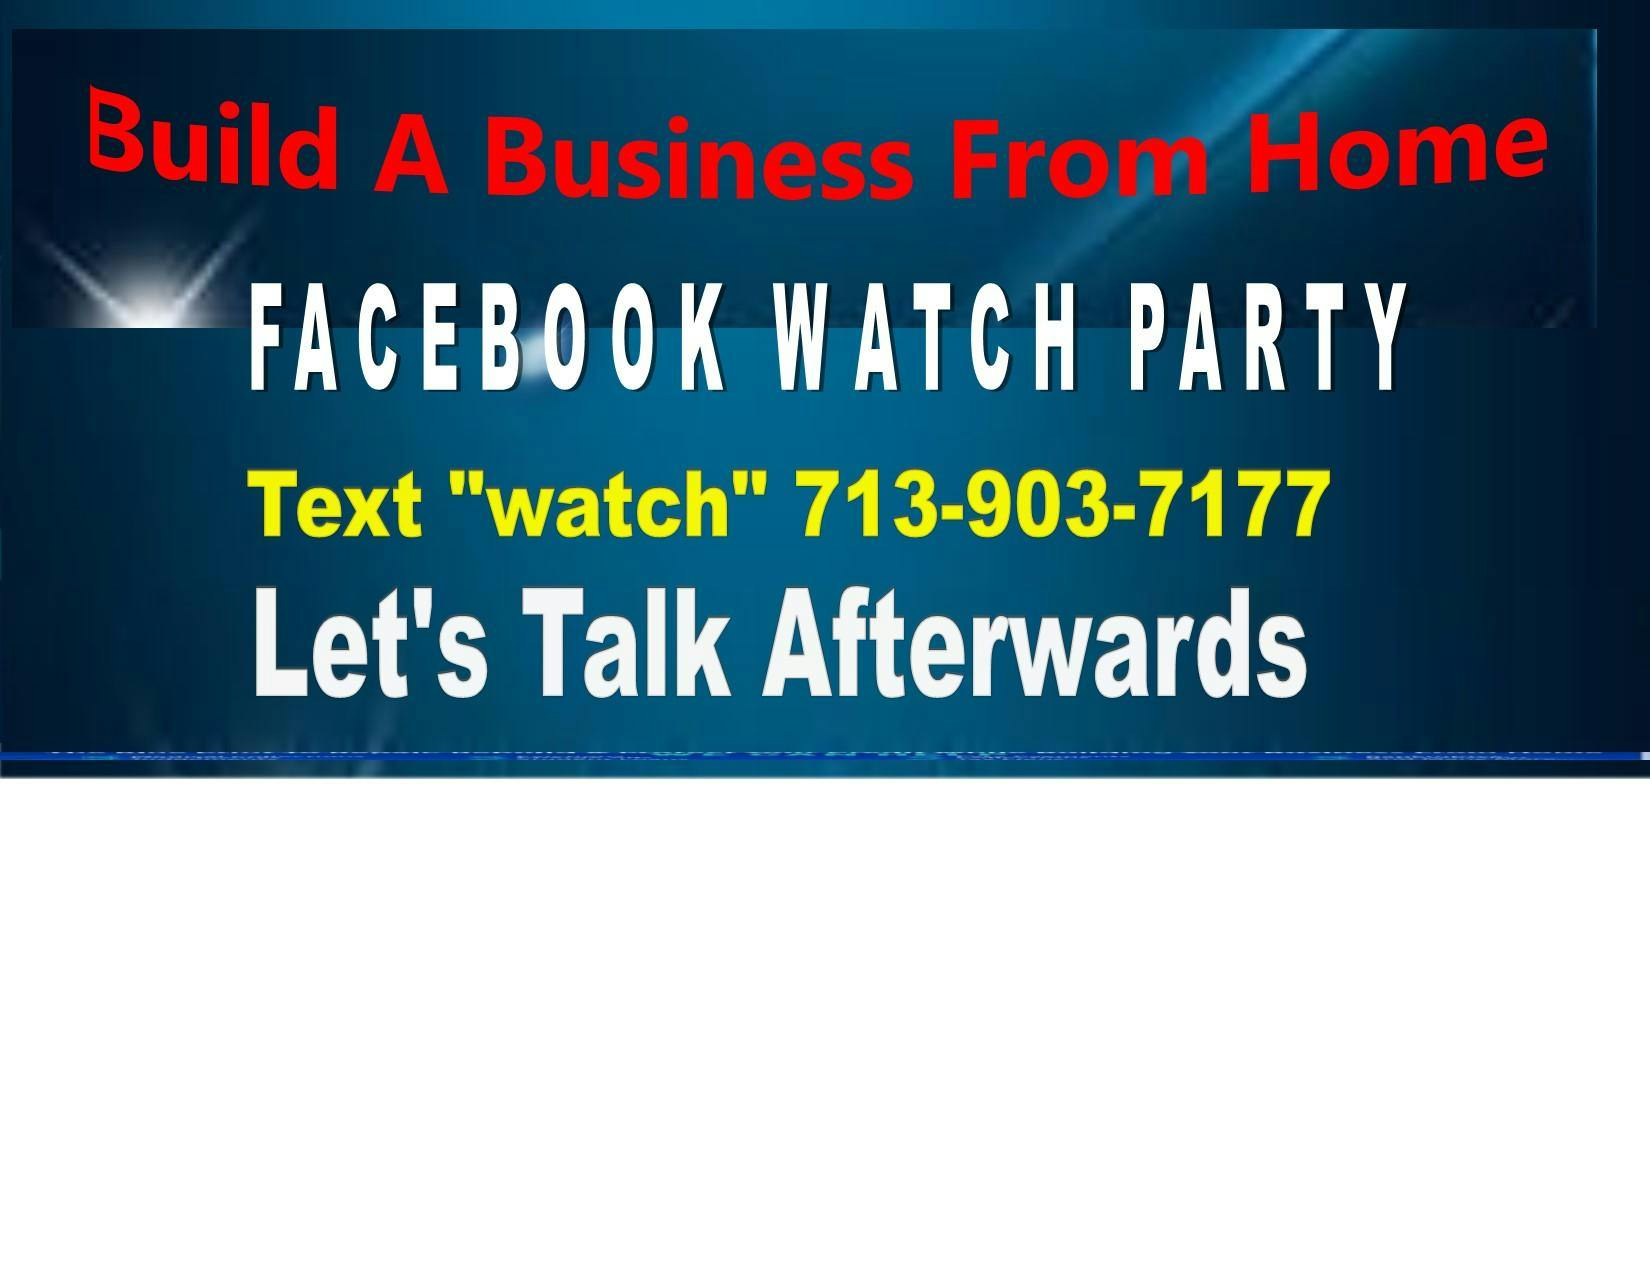 Face Book Watch Party Work From Home-McAllen 